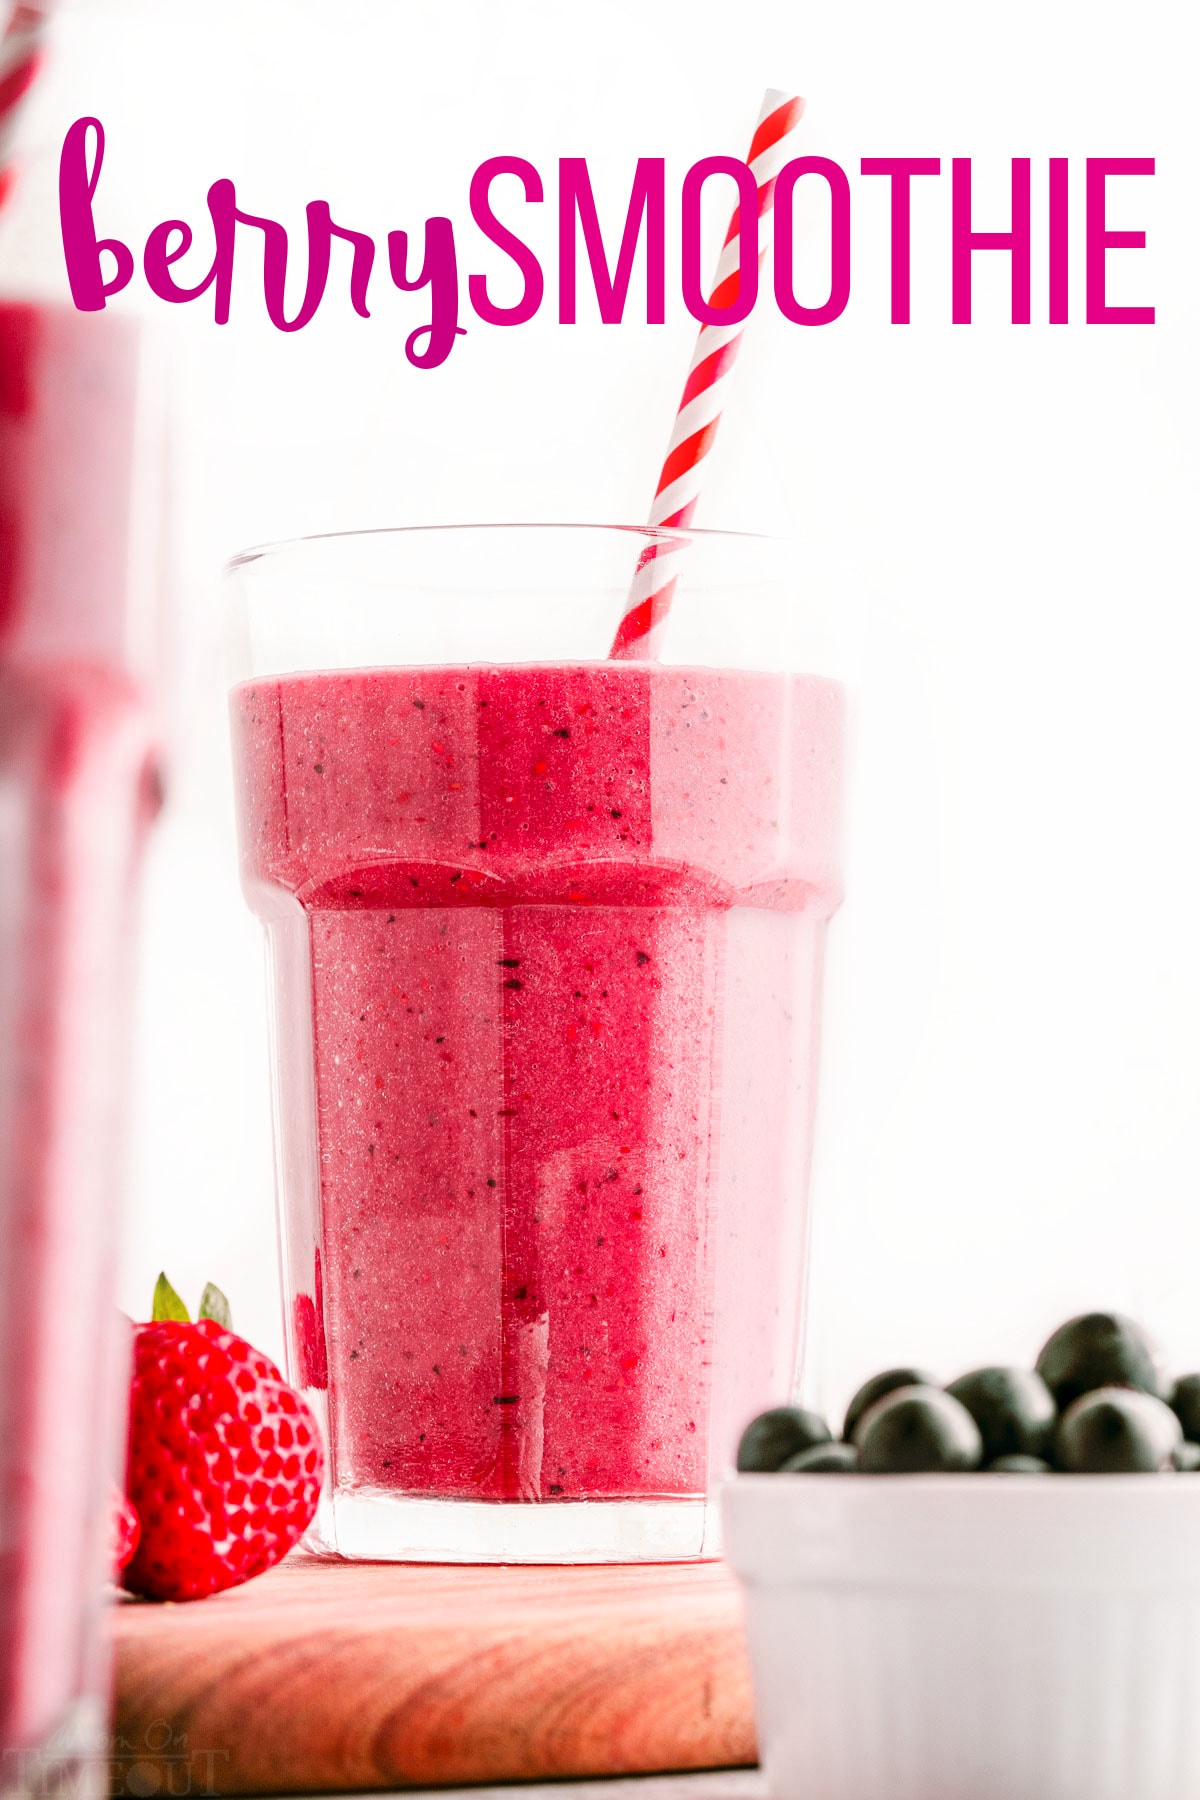 https://www.momontimeout.com/wp-content/uploads/2021/08/berry-smoothie.jpeg